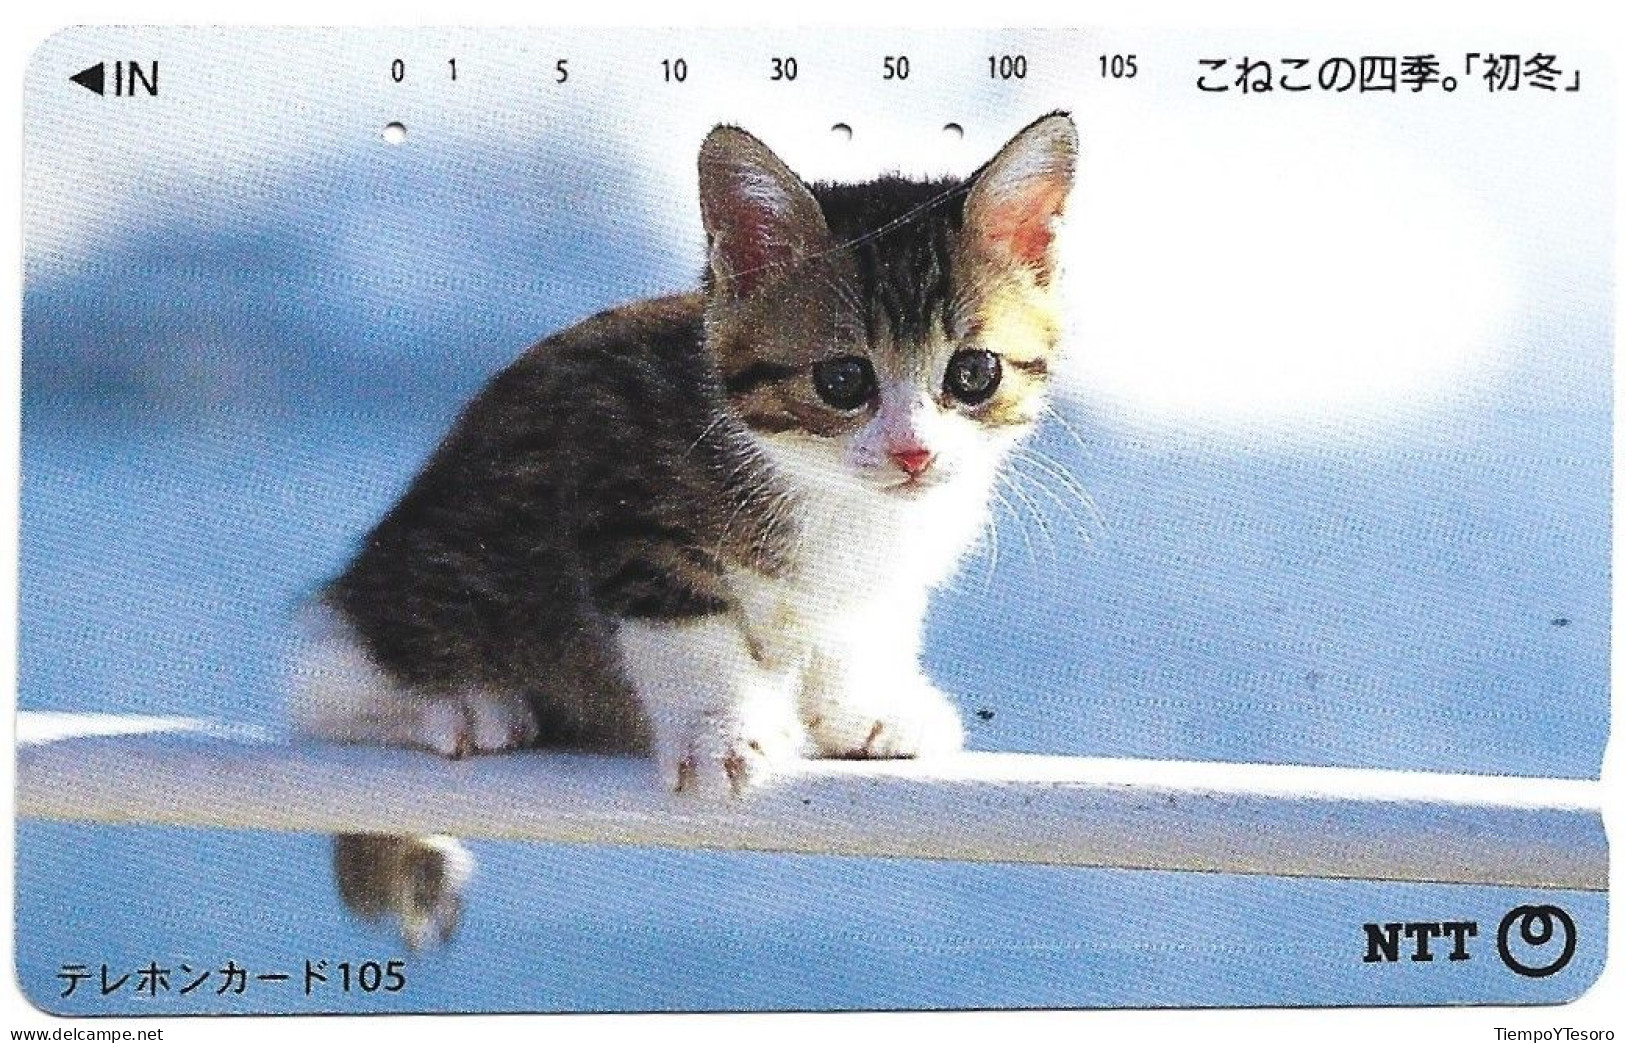 Phonecard - Japan, Kittens 8, N°1164 - Lots - Collections